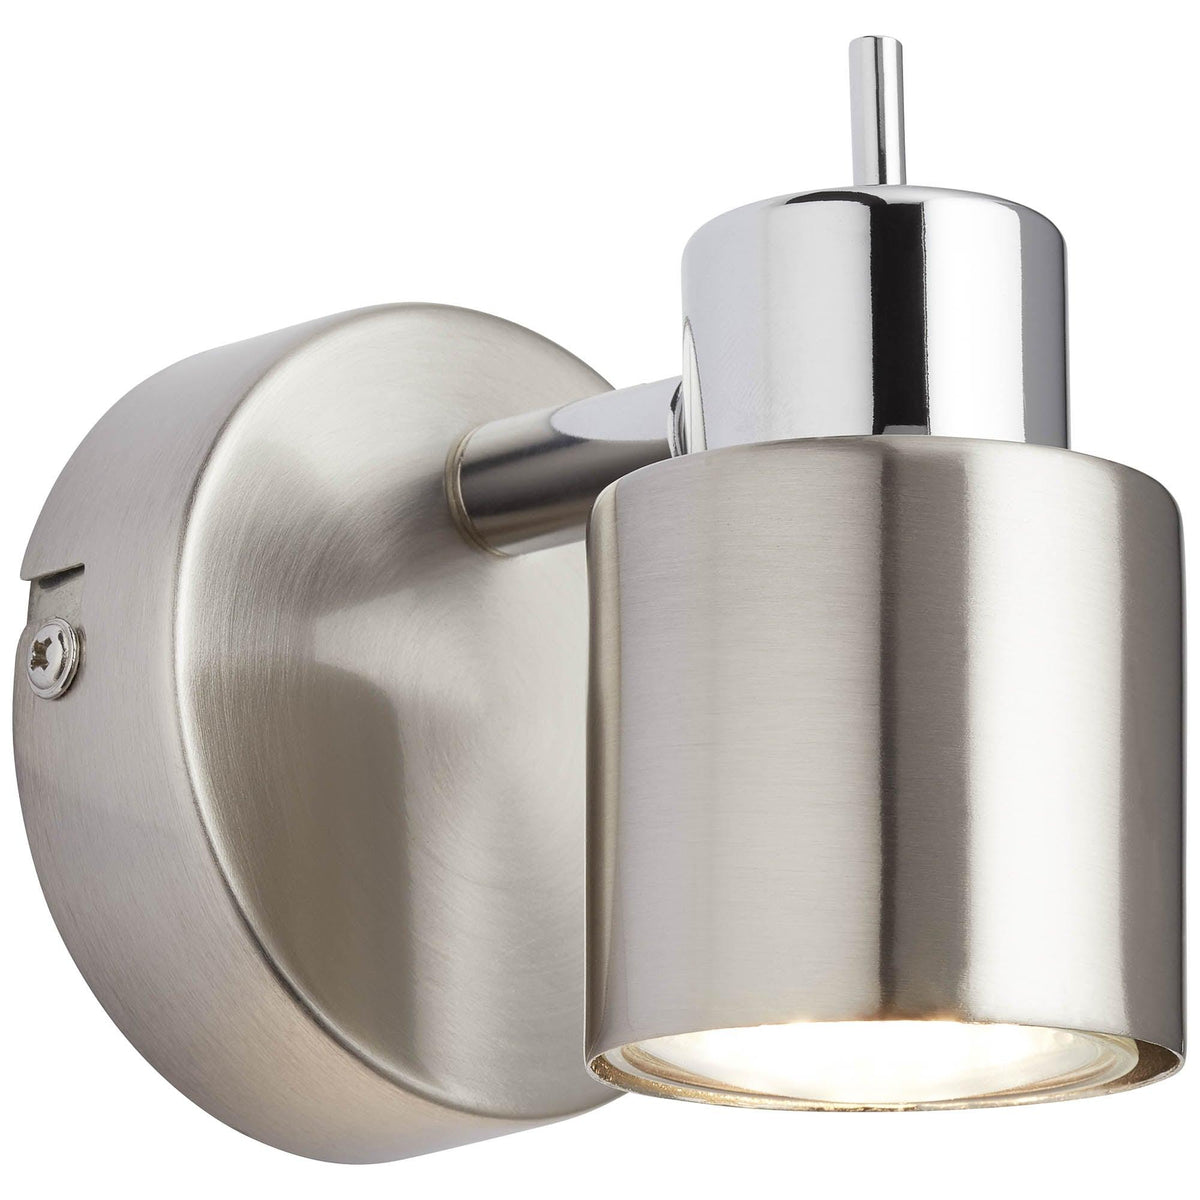 Brilliant 1 Light 10W Andres Wall Spotlight - Chrome | 74510/77 from DID Electrical - guaranteed Irish, guaranteed quality service. (6977594818748)